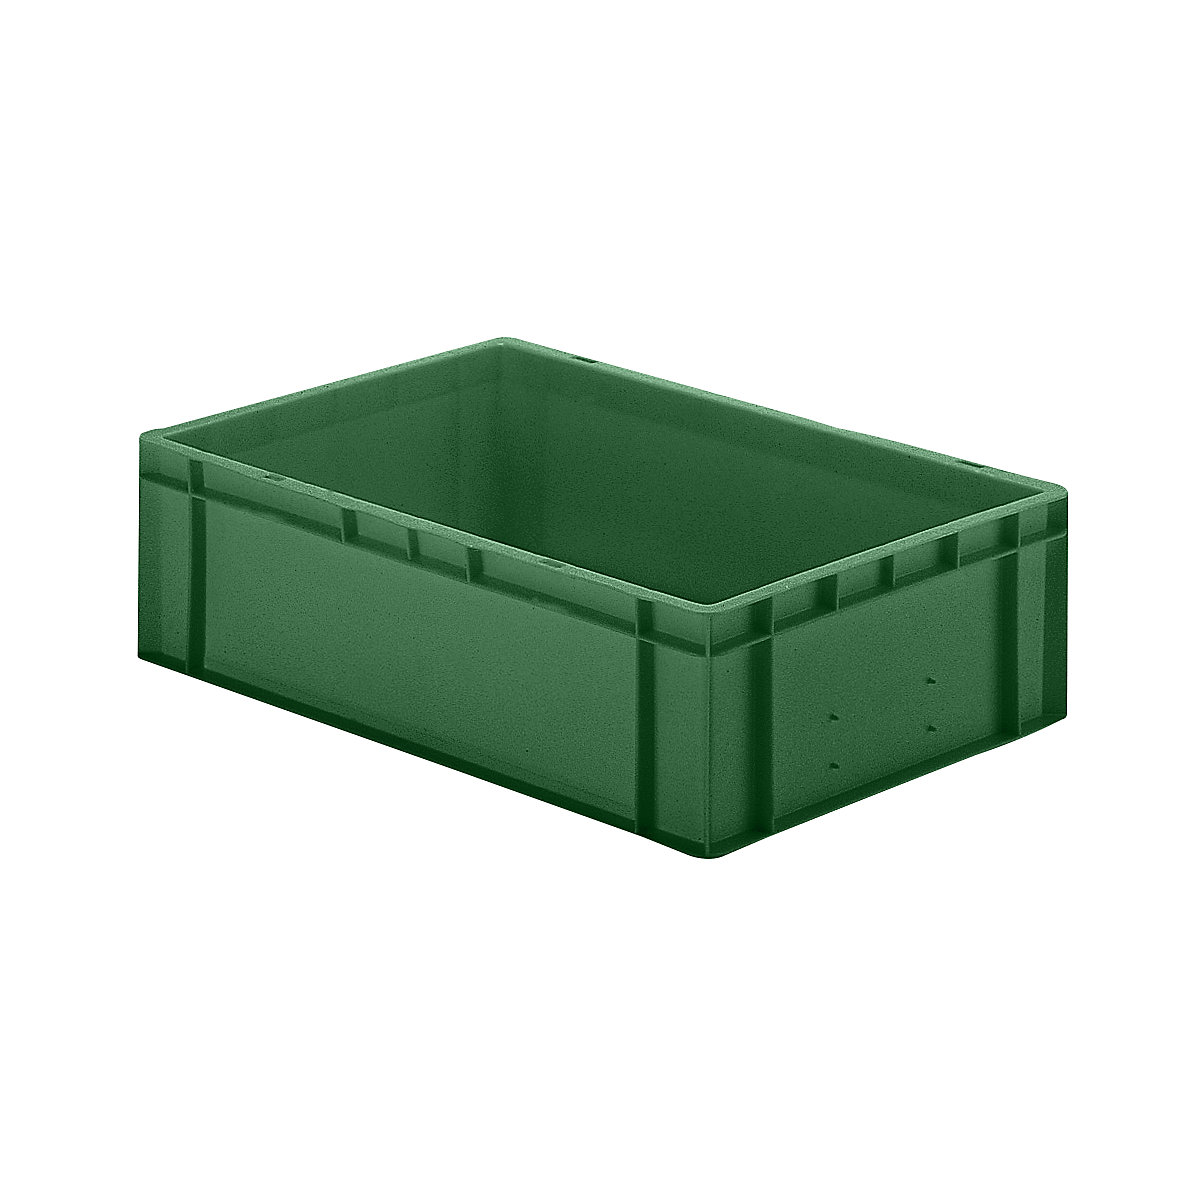 Euro stacking container, closed walls and base, LxWxH 600 x 400 x 175 mm, green, pack of 5